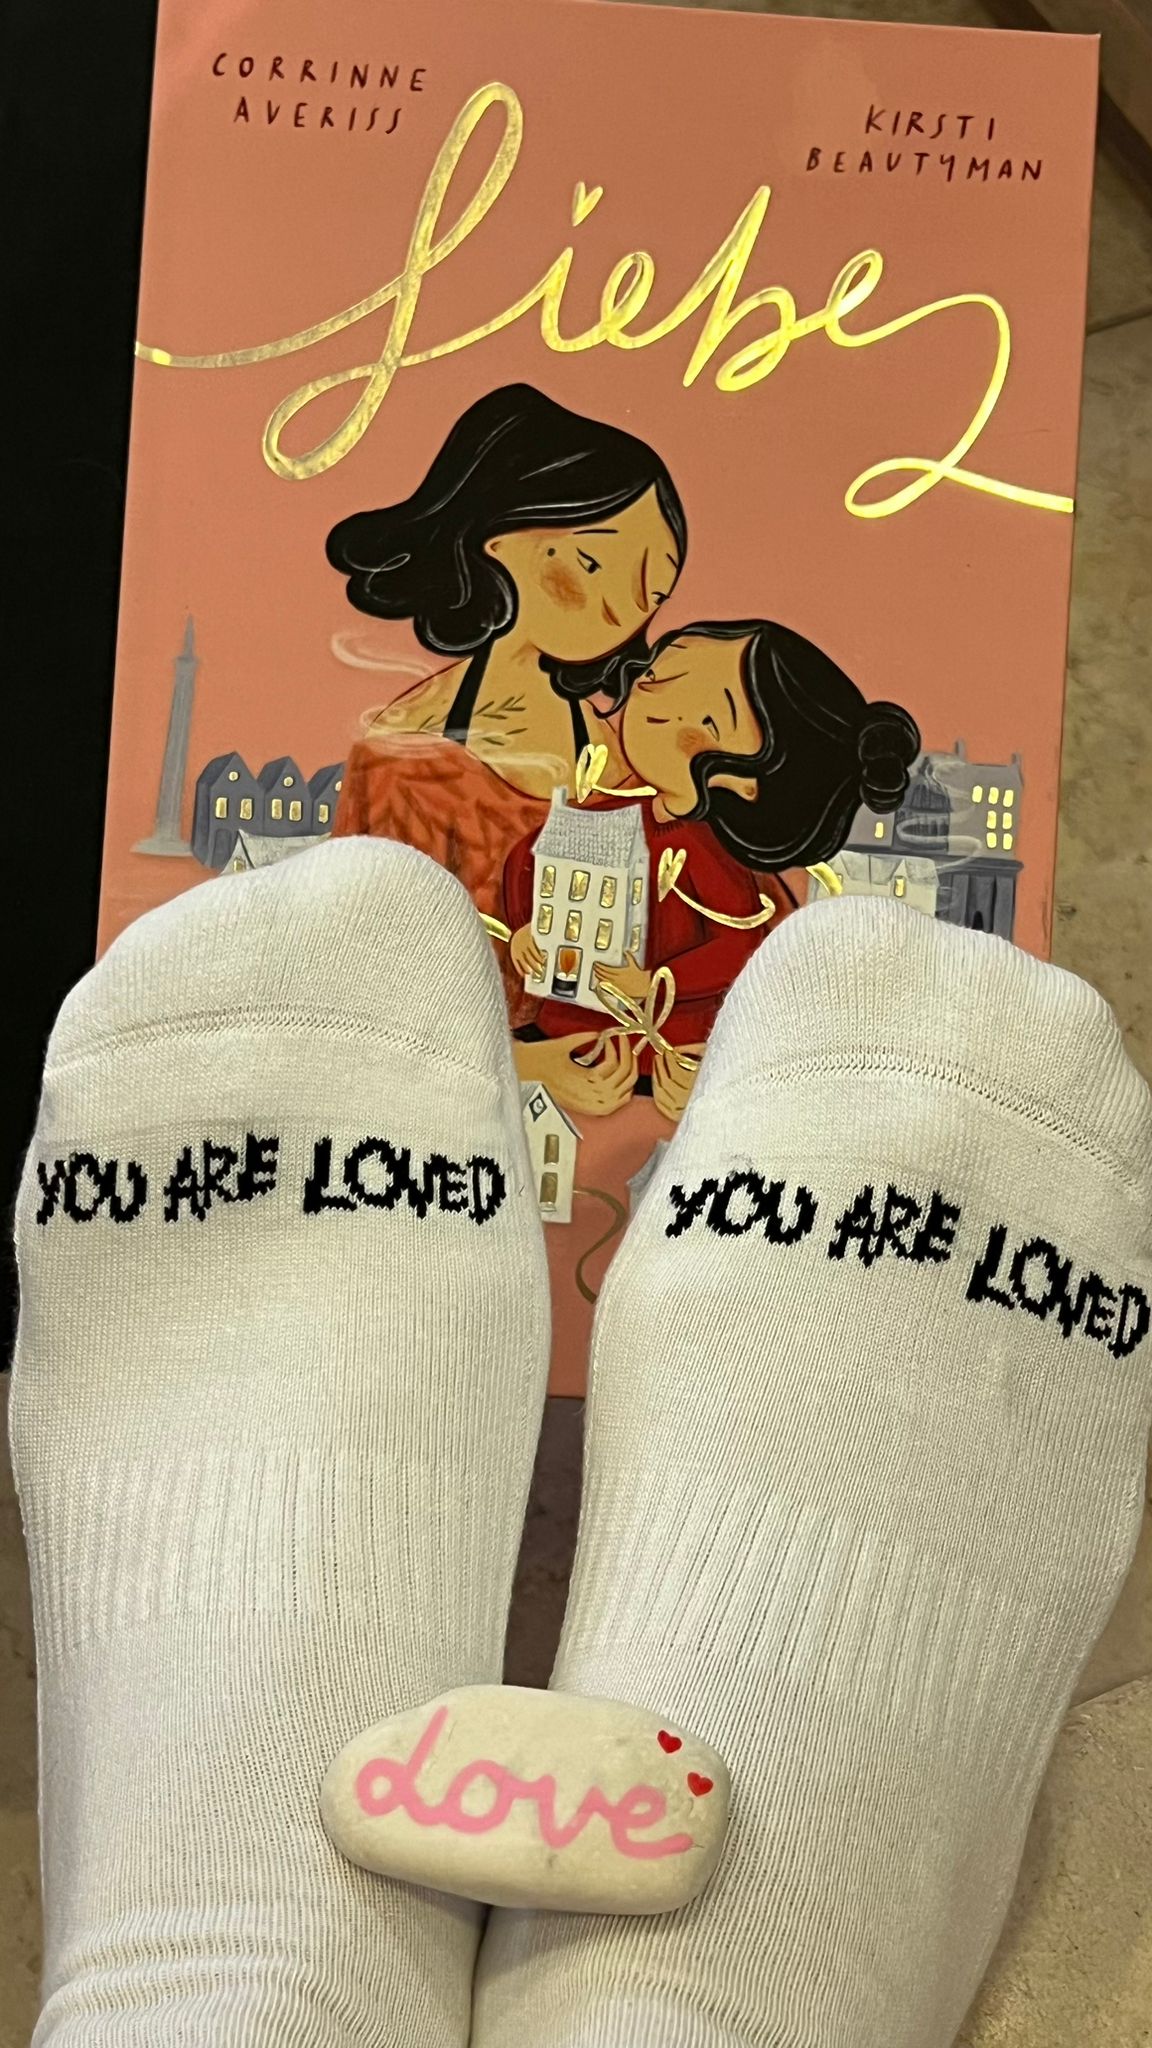 SOCKEN DESIGNED BY ONE DAY E.V. “YOU ARE LOVED”